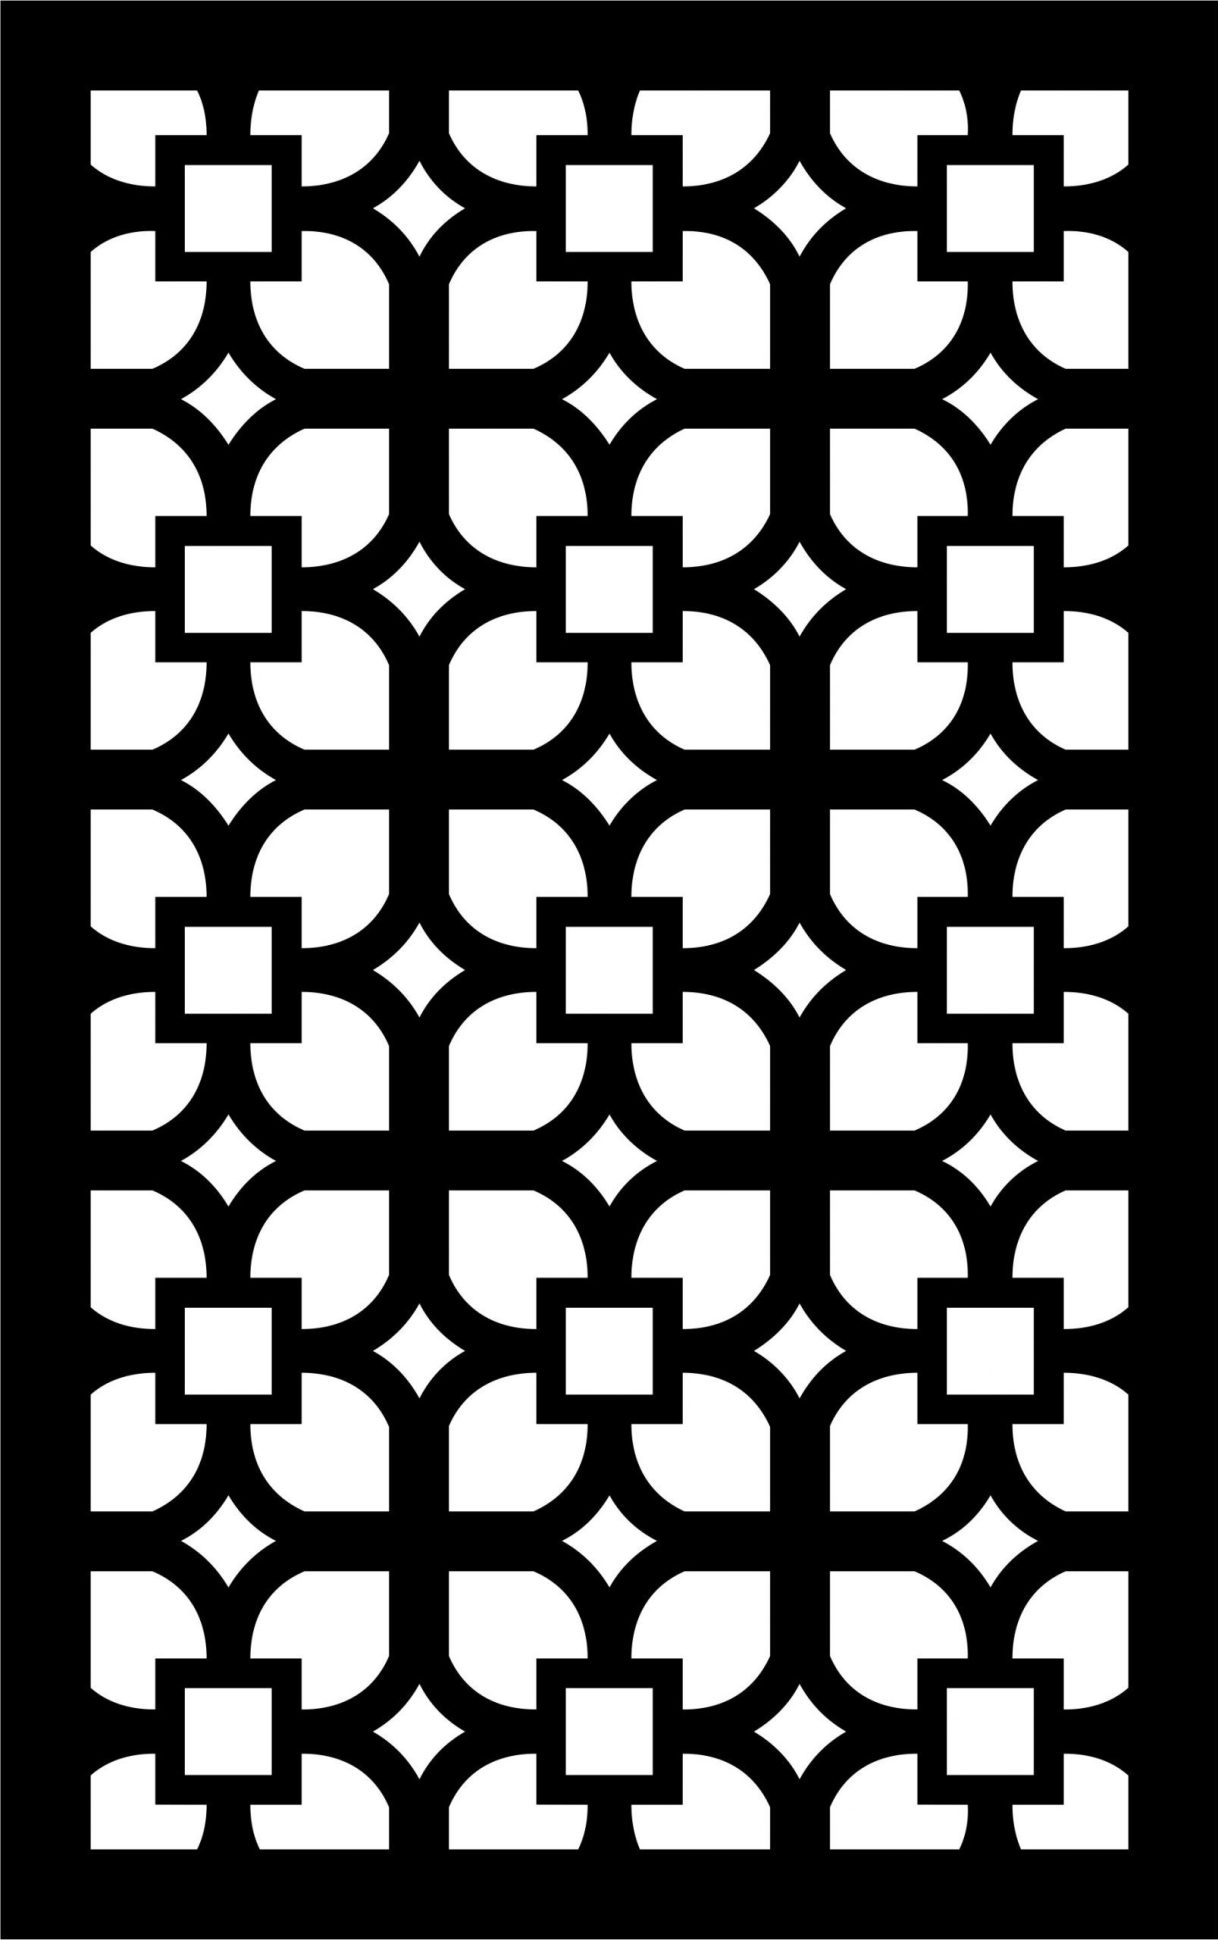 Decorative Screen Patterns For Laser Cutting 18 Free DXF File